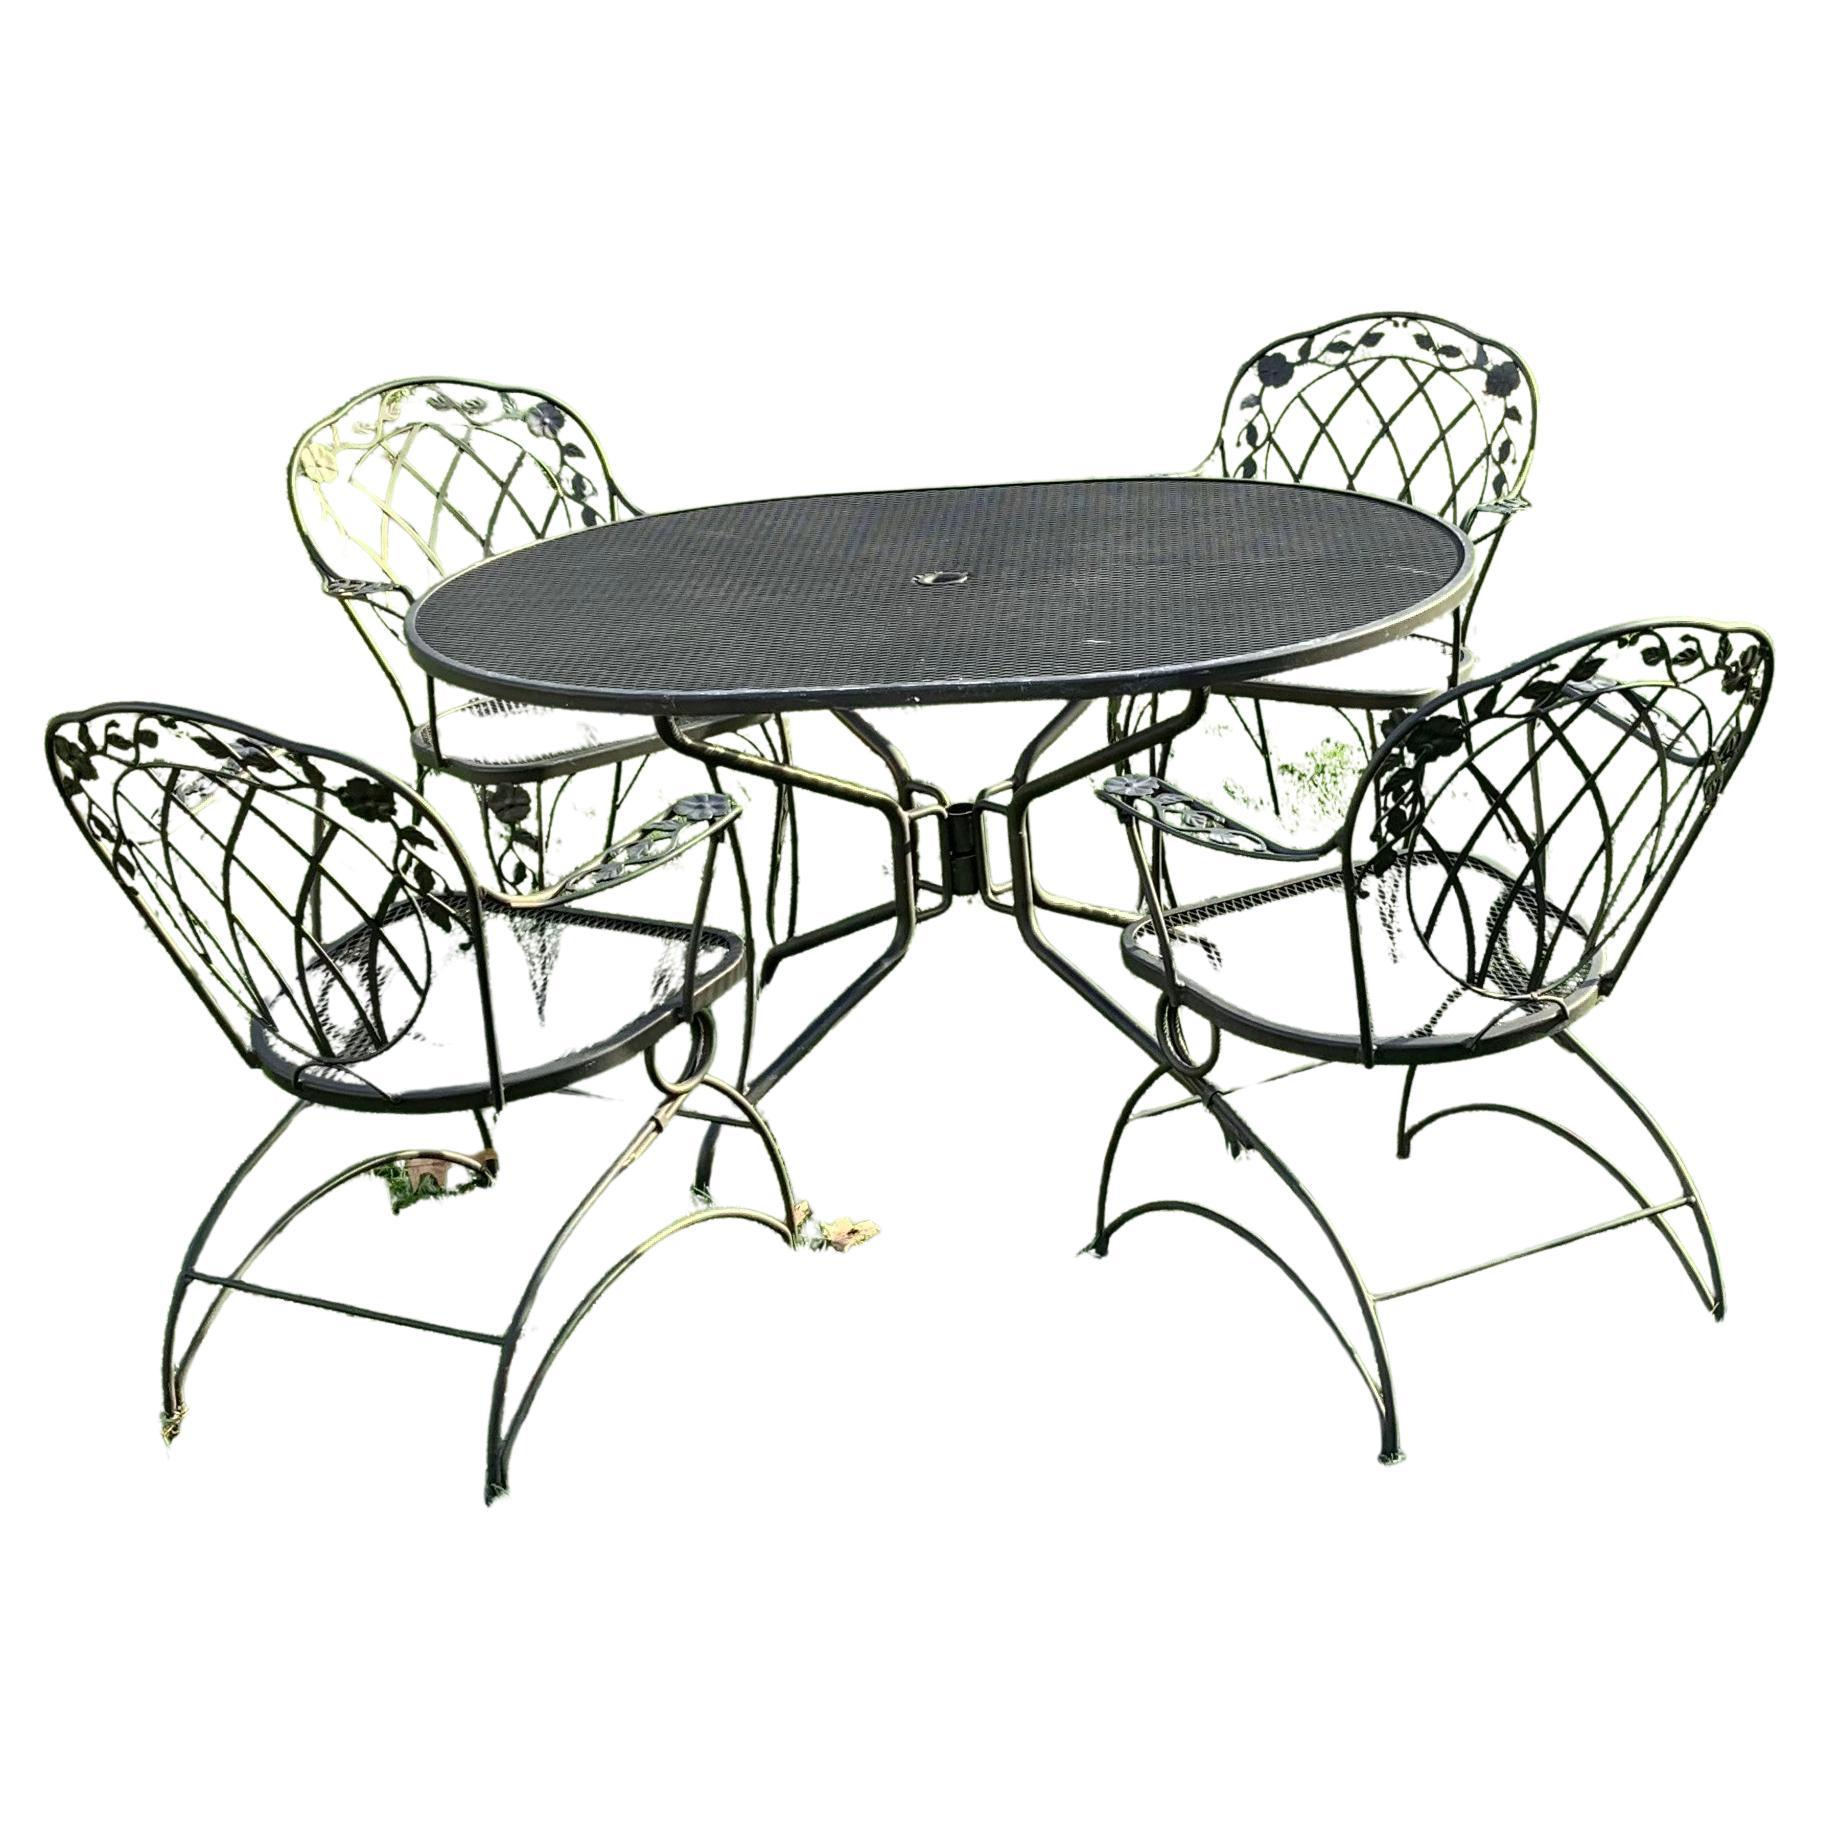 Woodard Oversized Table with 4 Rocker Spring Chairs For Sale